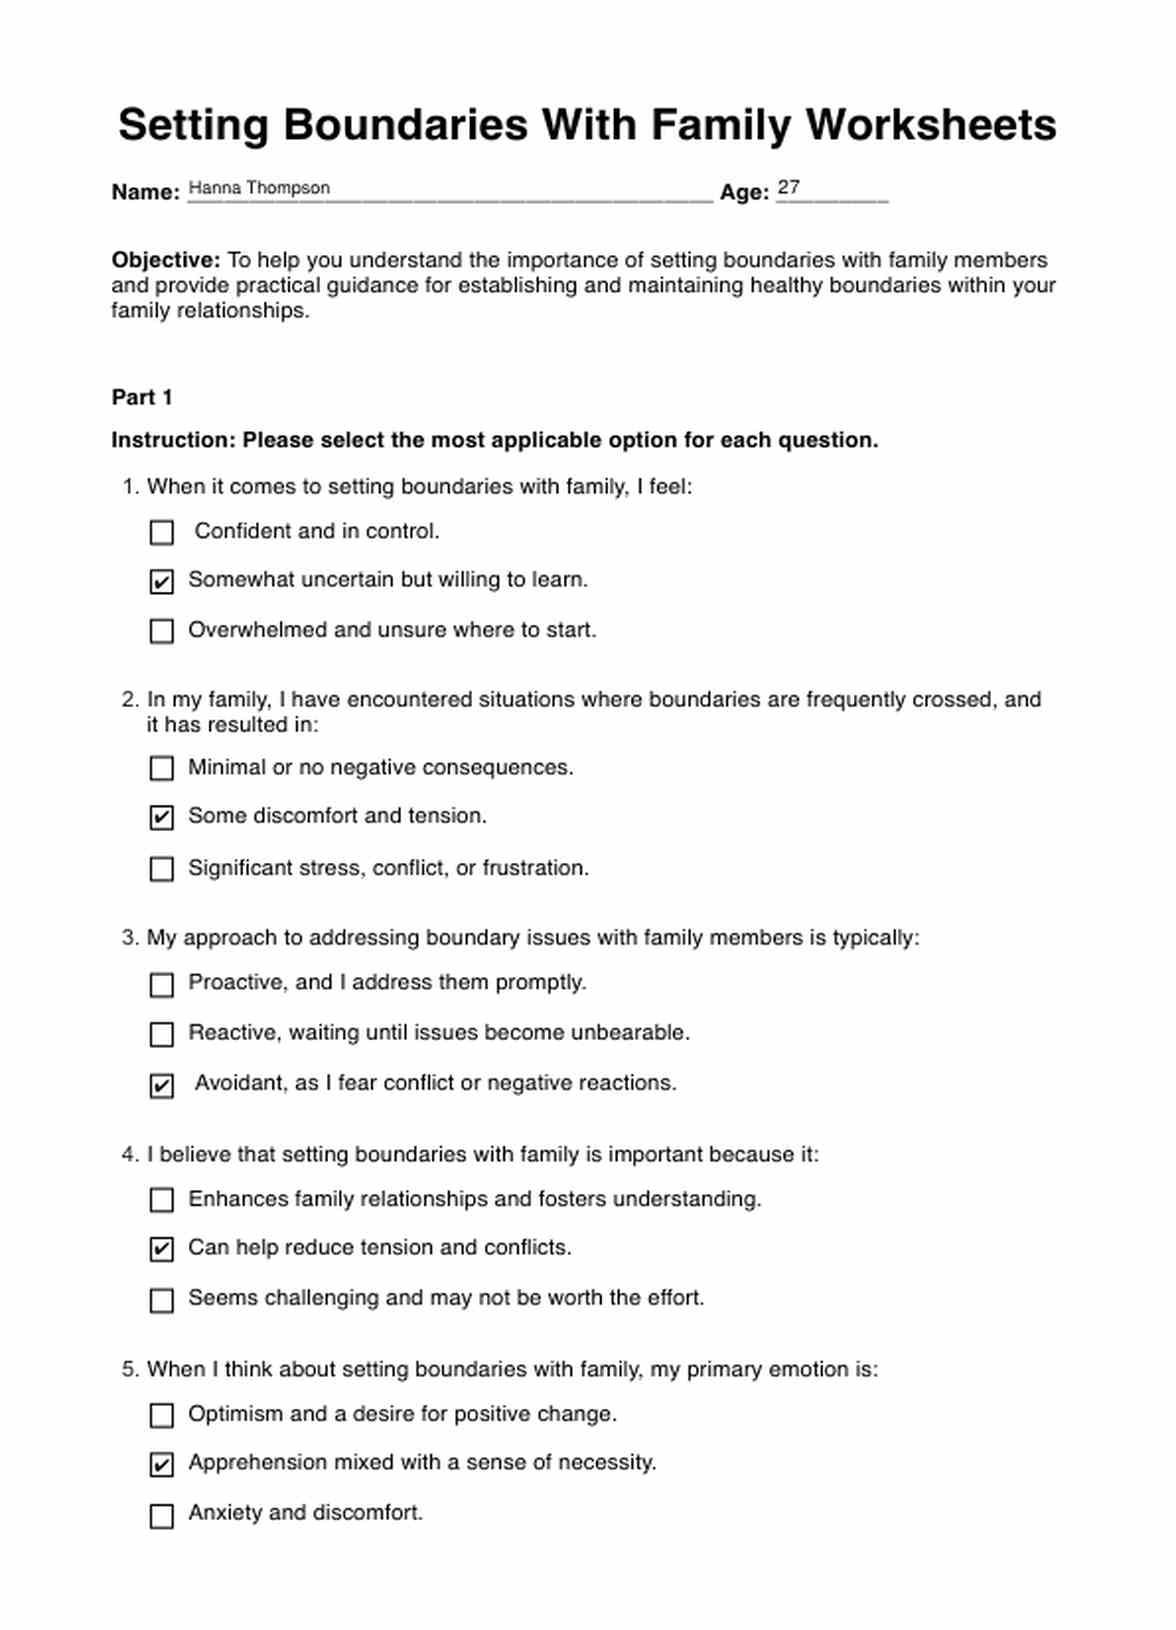 Setting Boundaries With Family Worksheets PDF Example